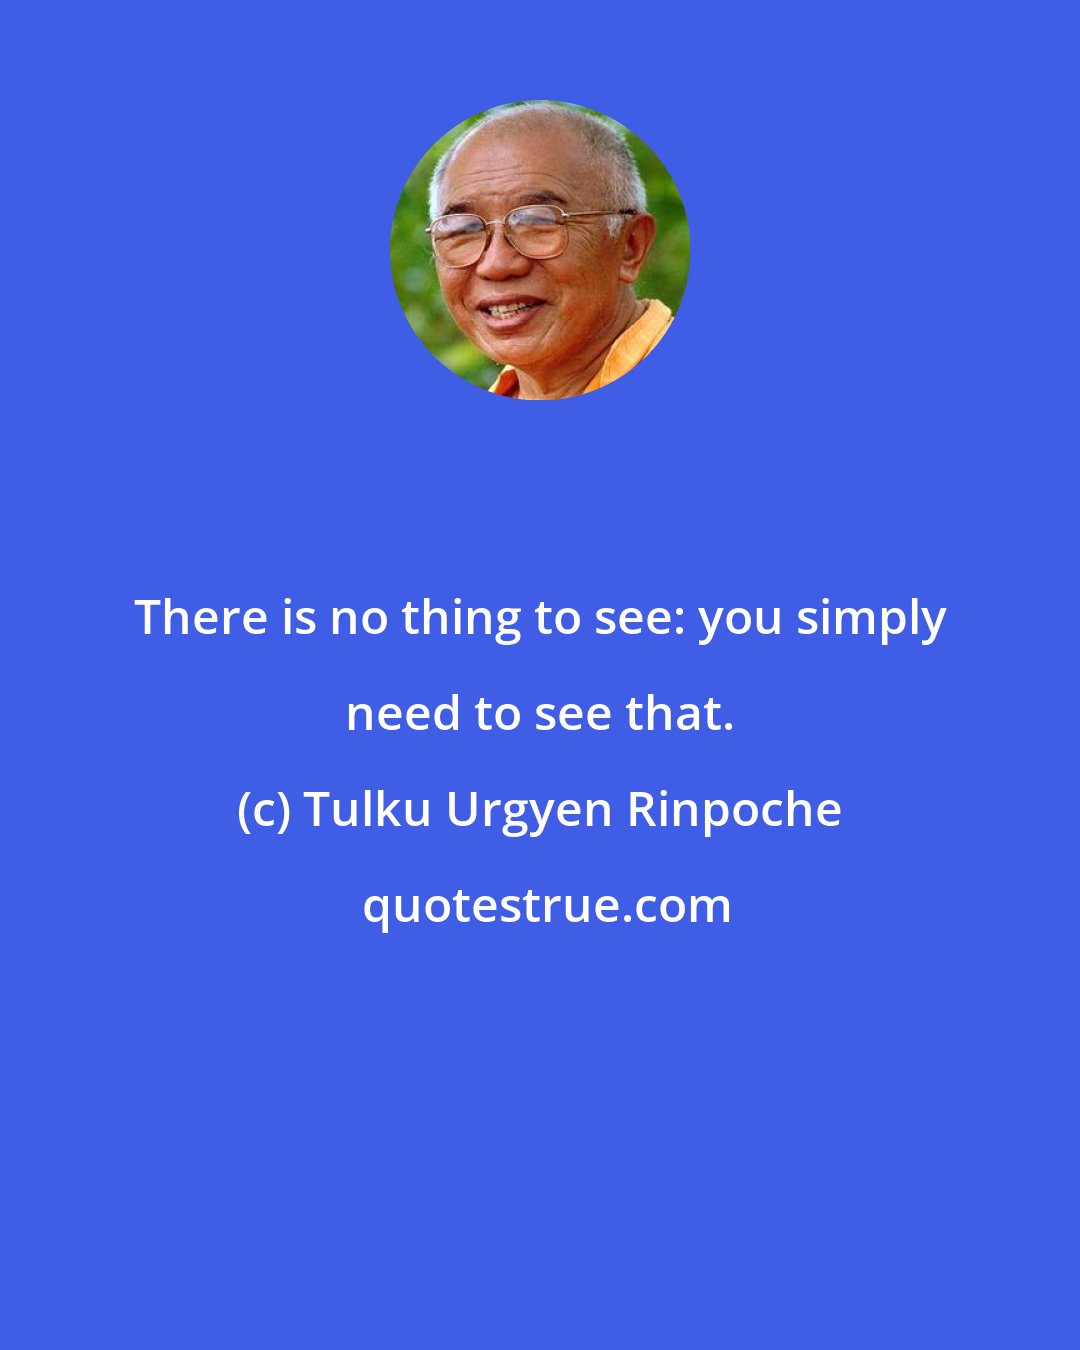 Tulku Urgyen Rinpoche: There is no thing to see: you simply need to see that.